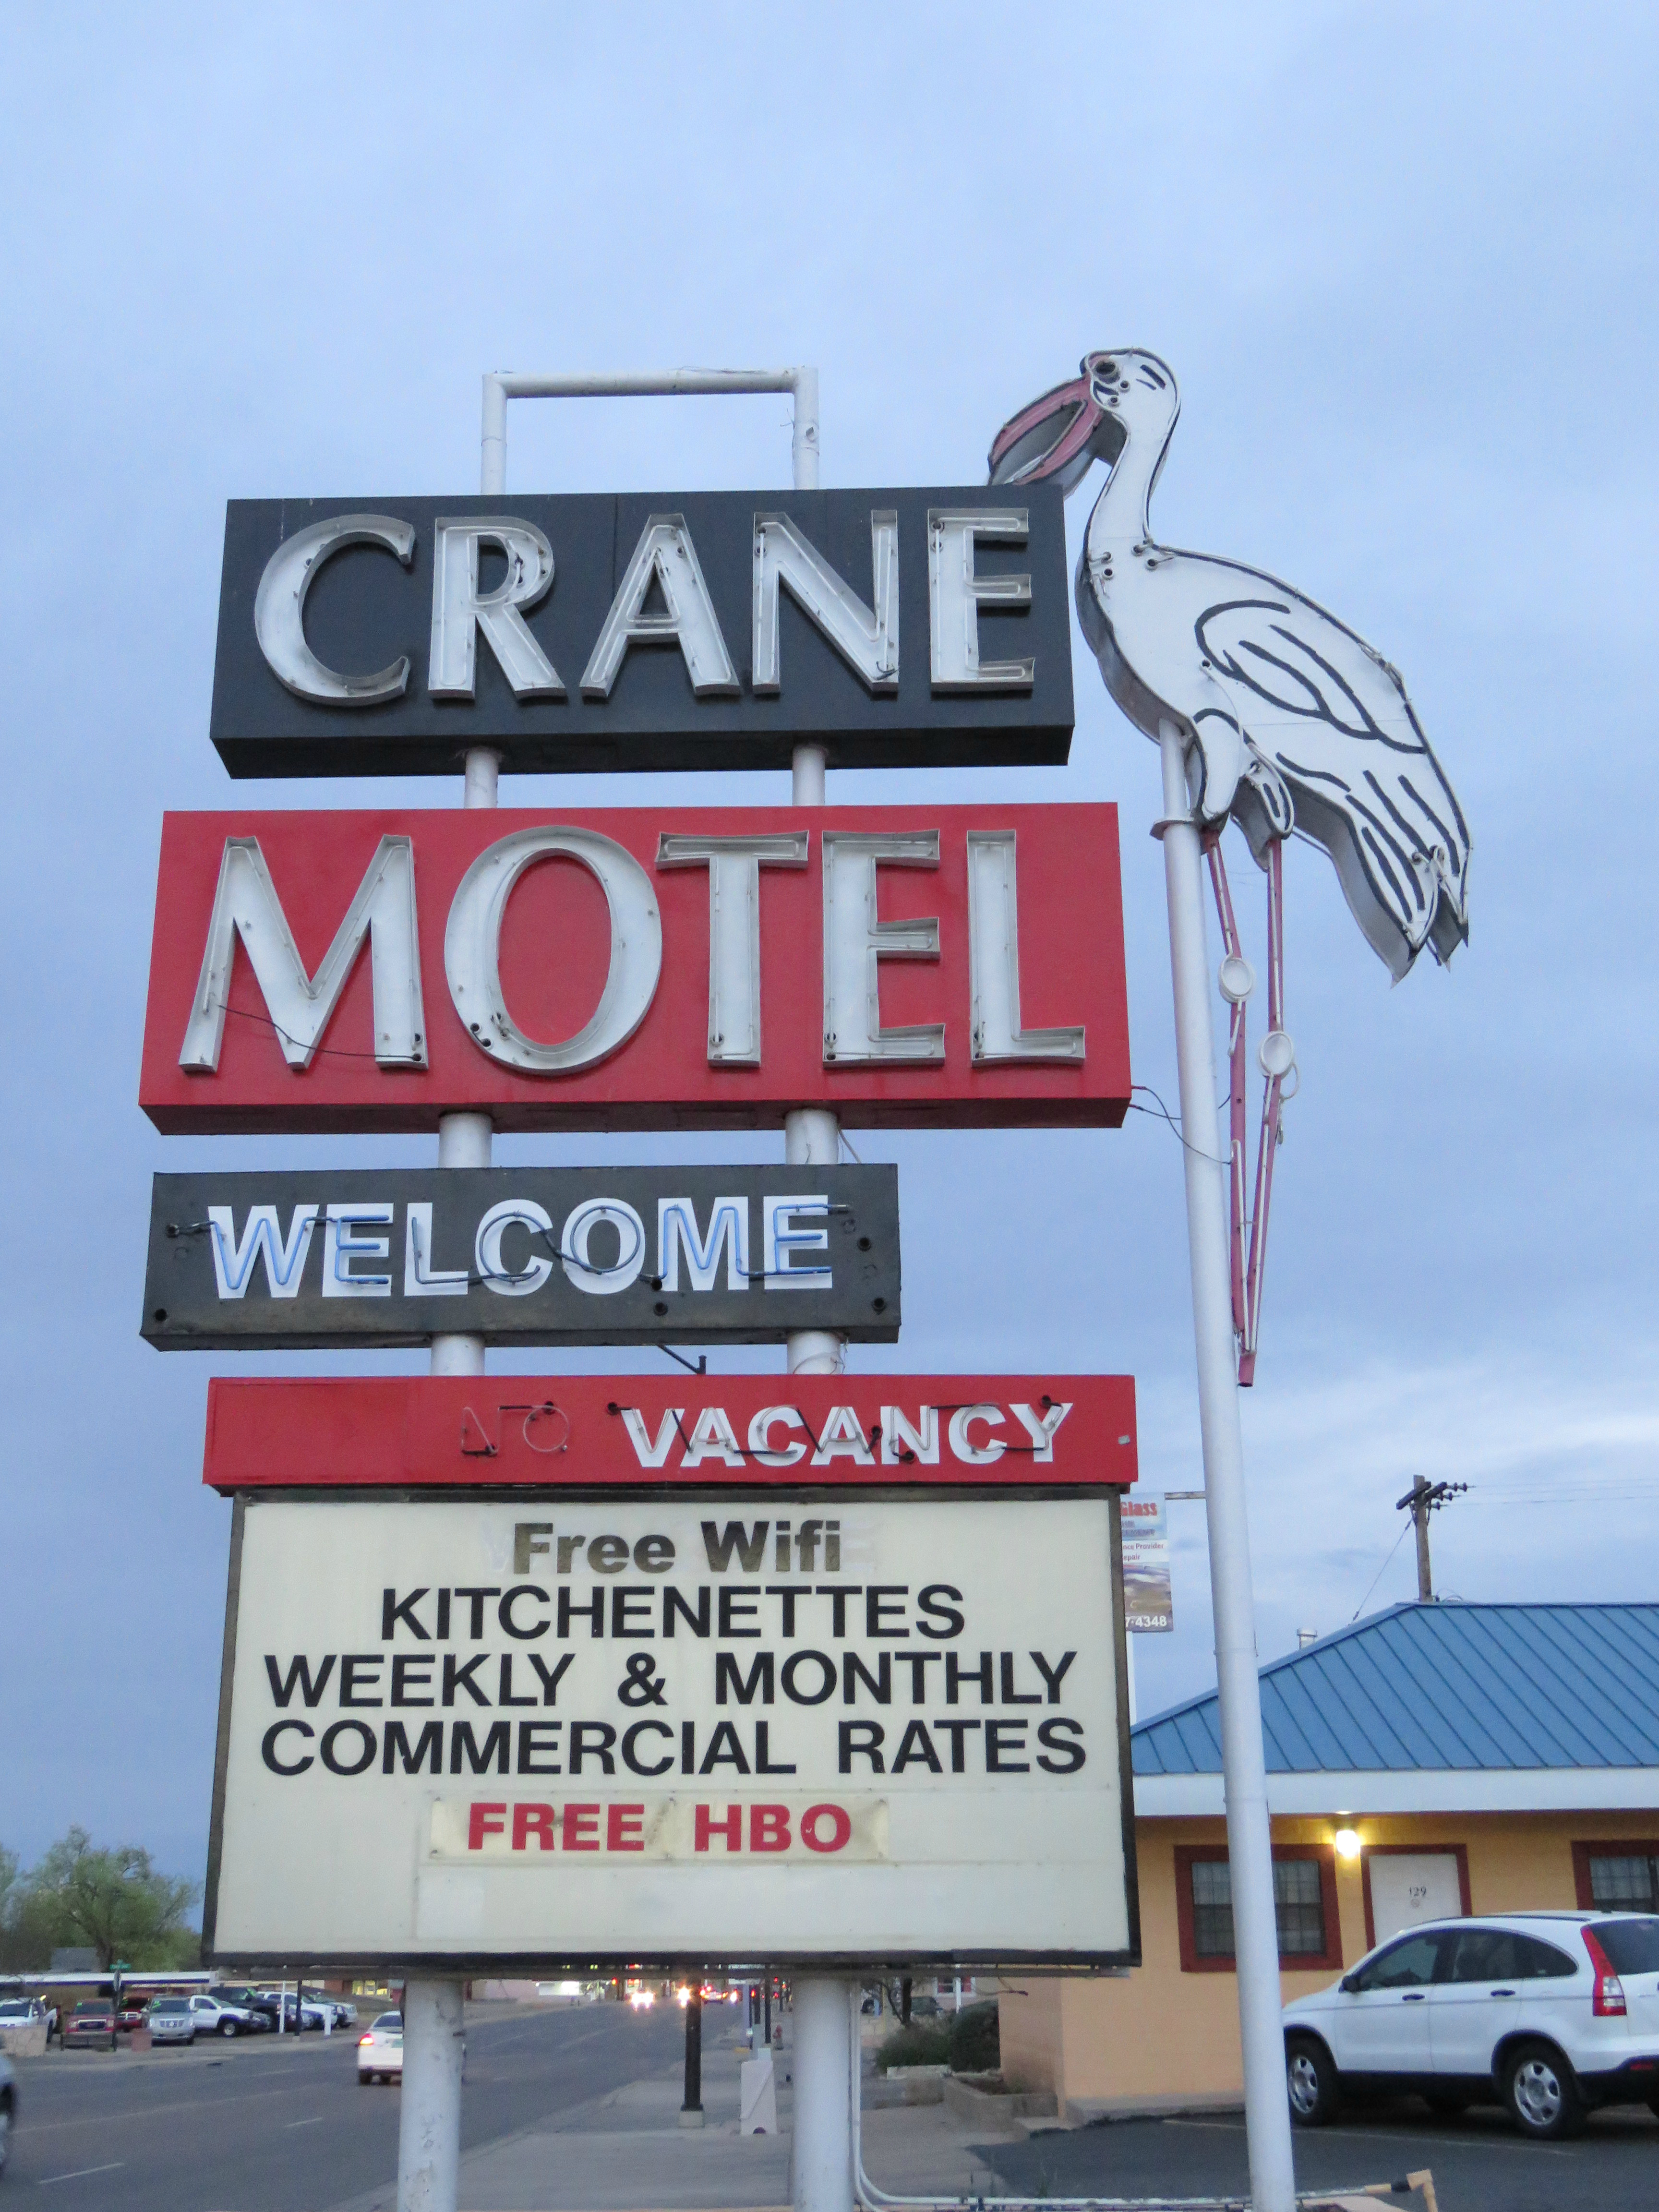 Crane Motel - 1212 West 2nd Street, Roswell, New Mexico U.S.A. - March 7, 2016